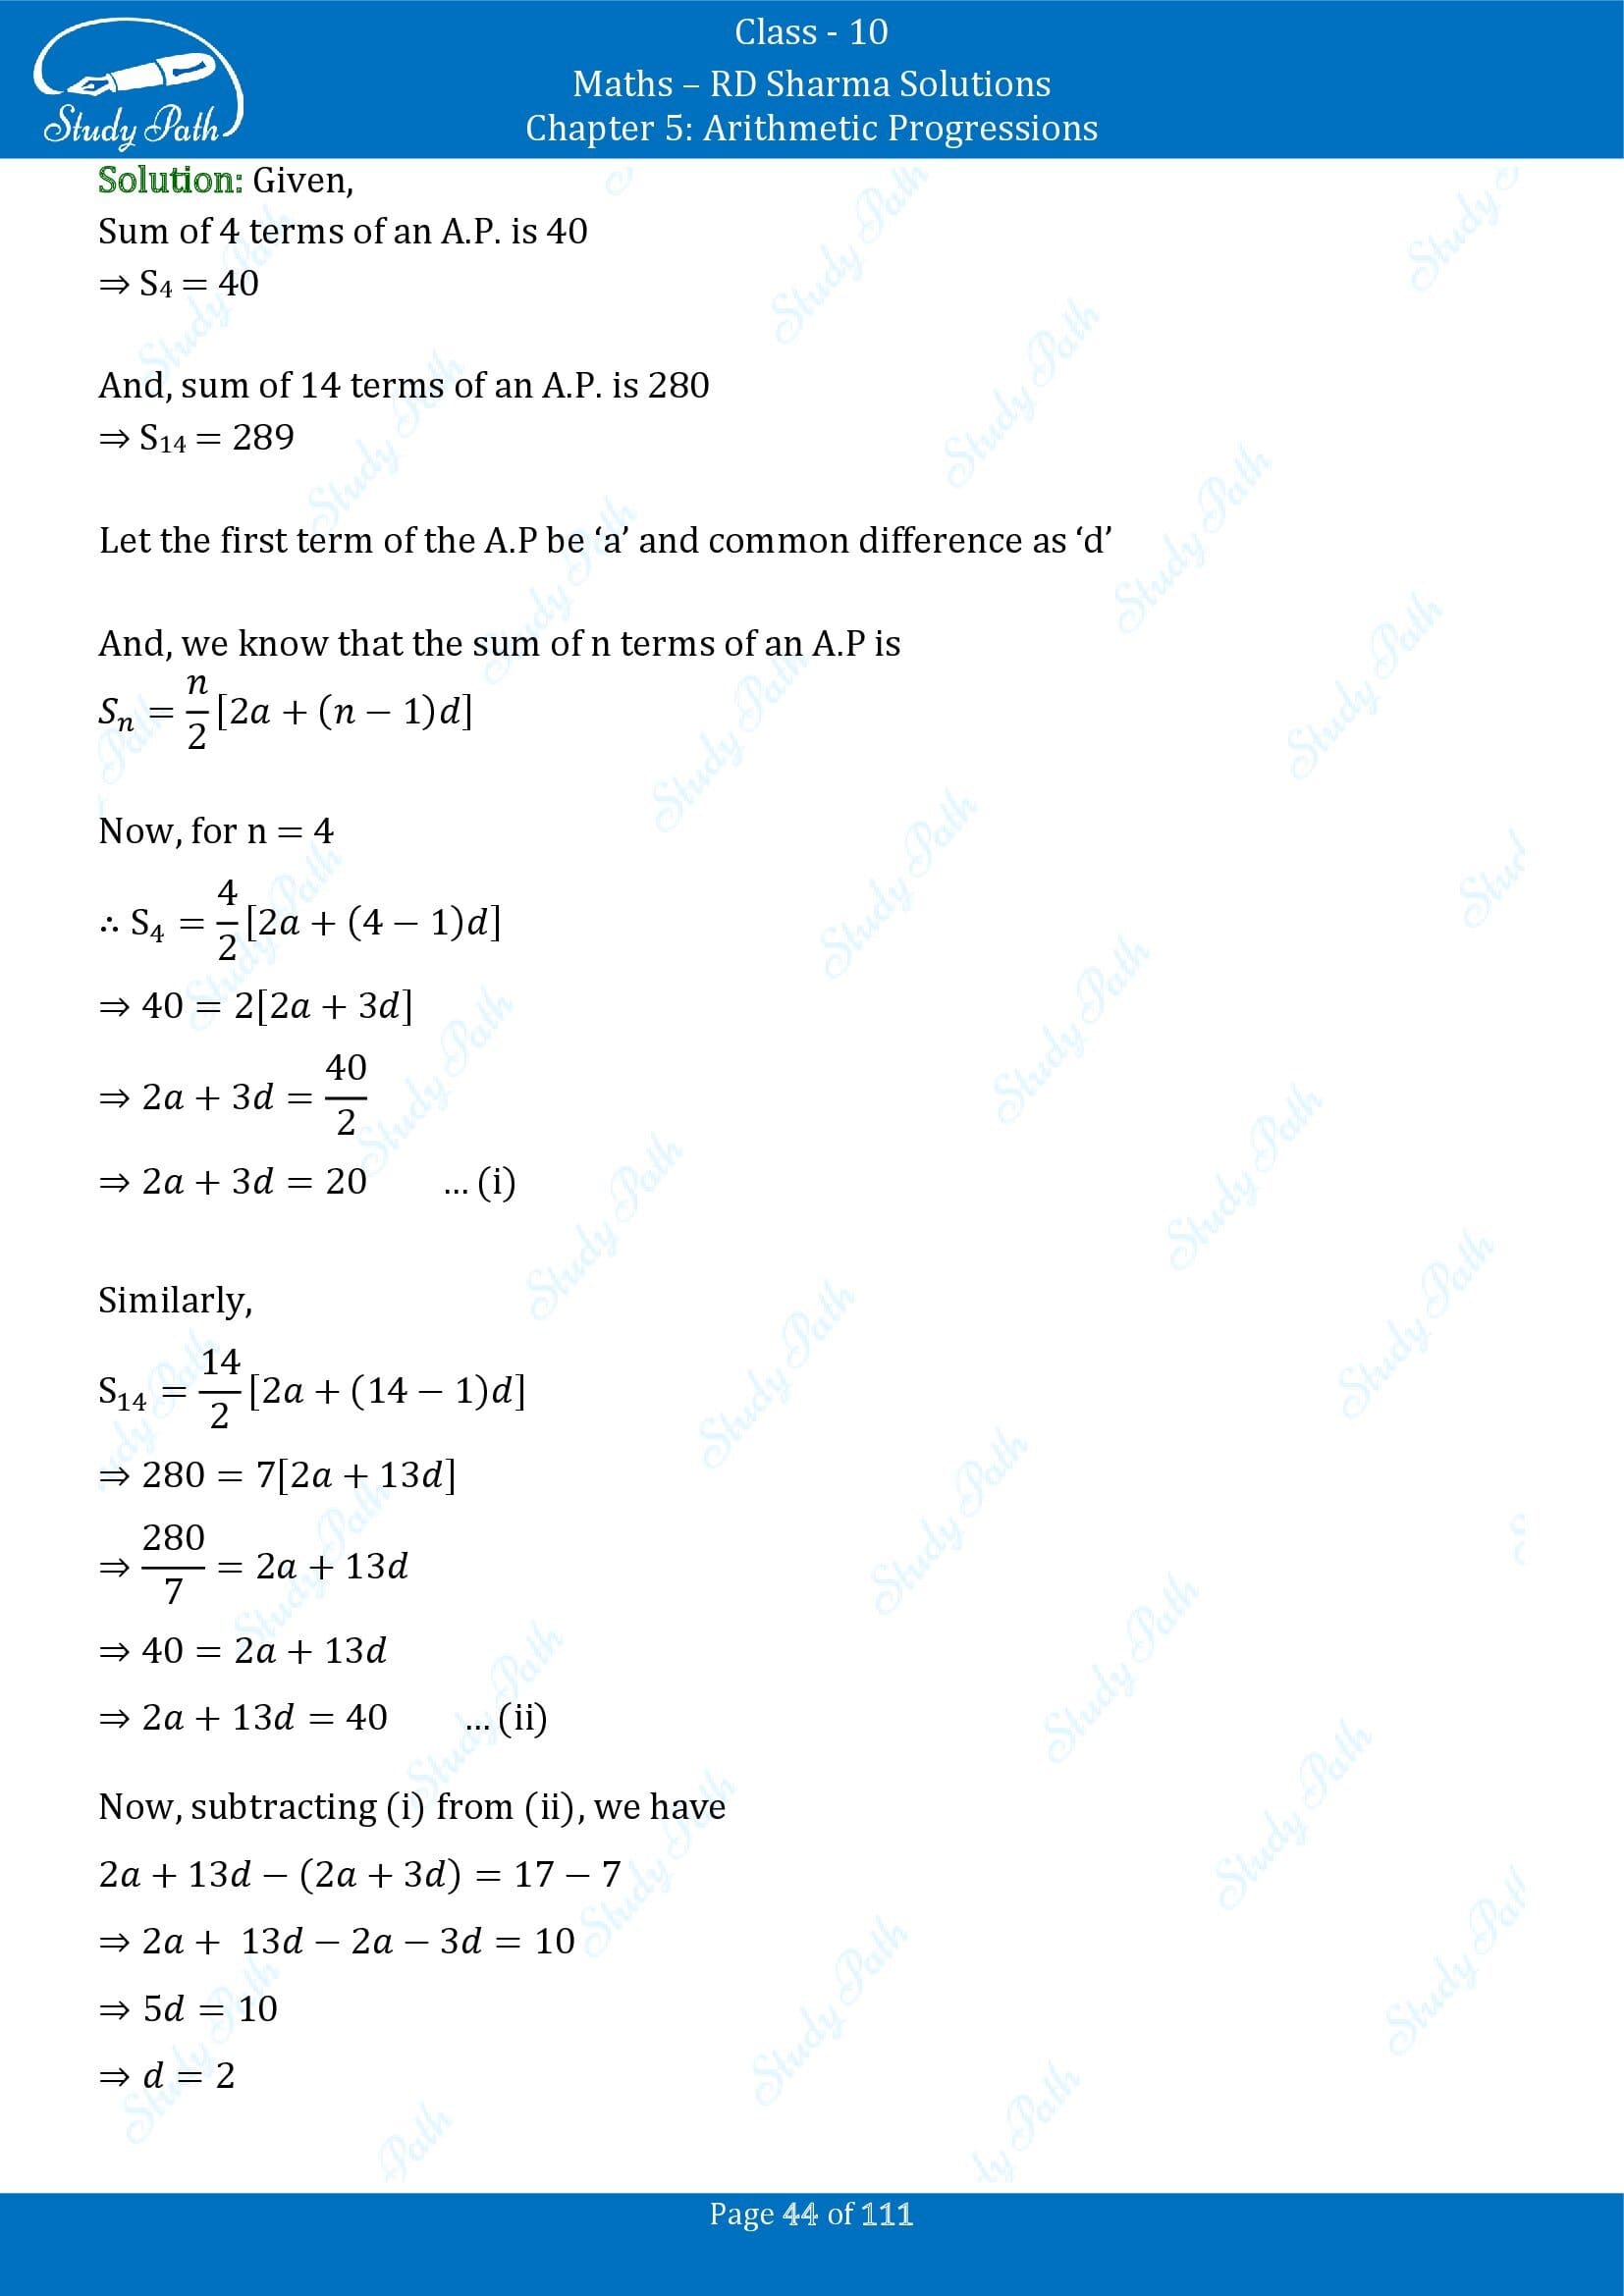 RD Sharma Solutions Class 10 Chapter 5 Arithmetic Progressions Exercise 5.6 00044